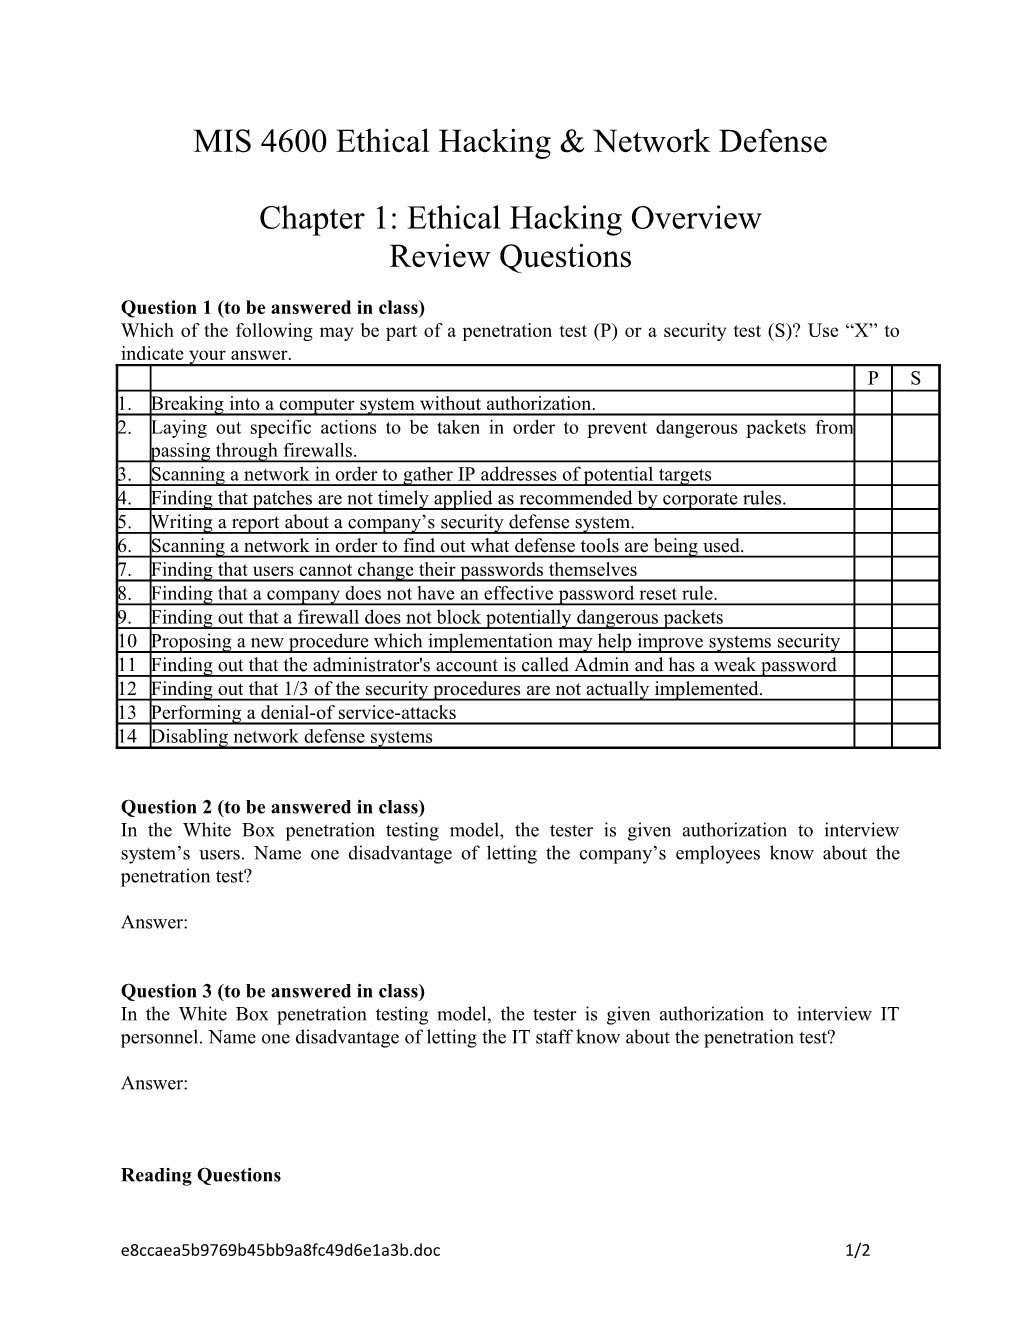 MIS 4600 Ethical Hacking & Network Defense